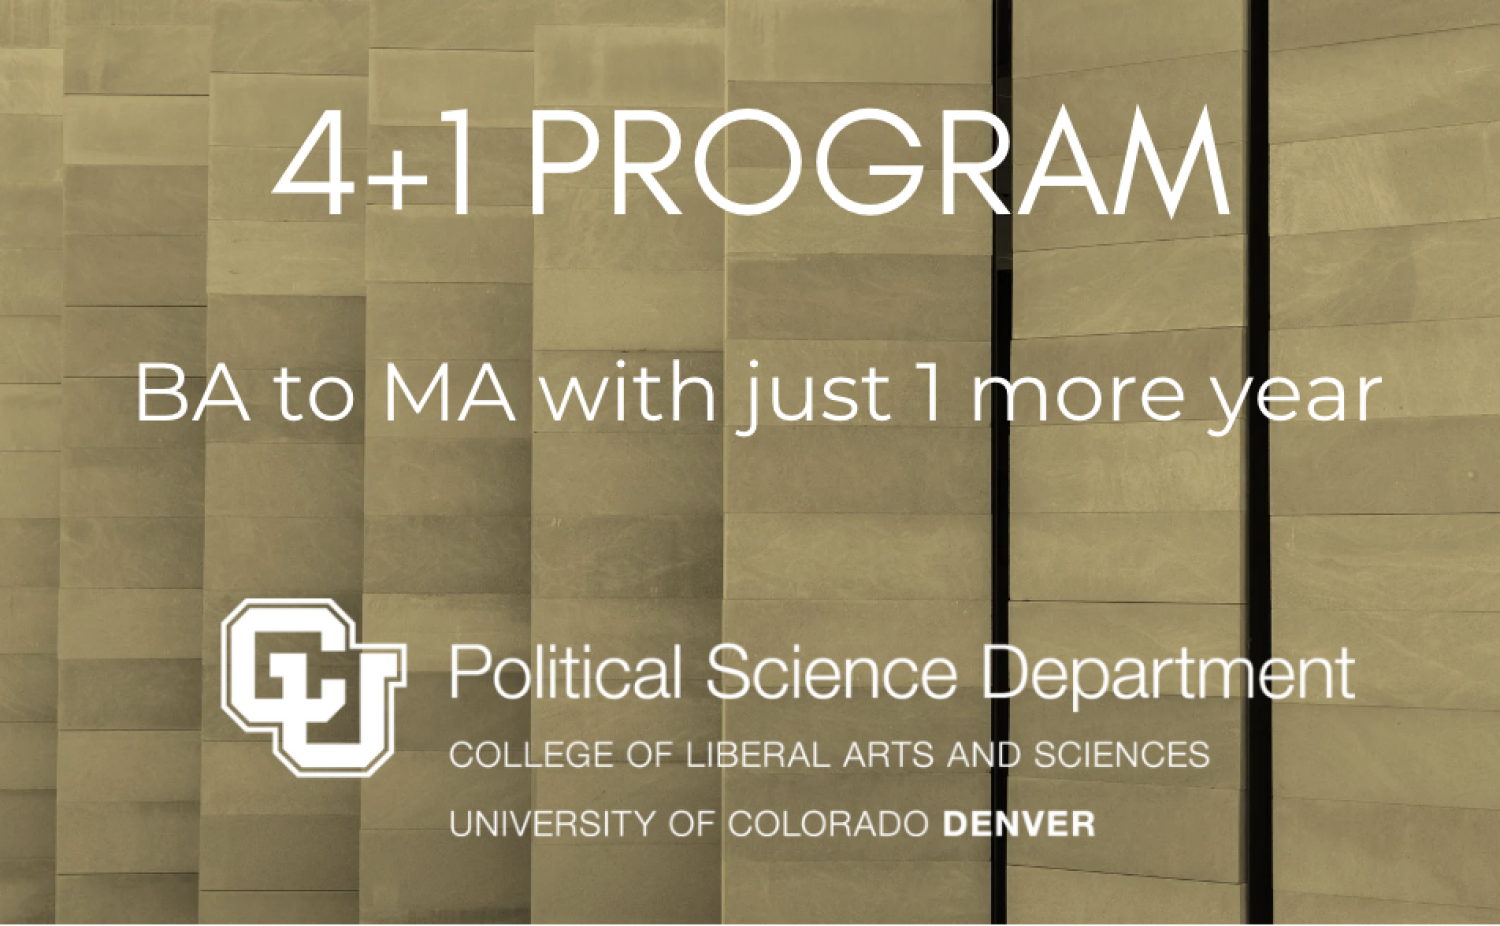 4+1 Program BA to MA with just 1 more year CU Denver Political Science Department logo